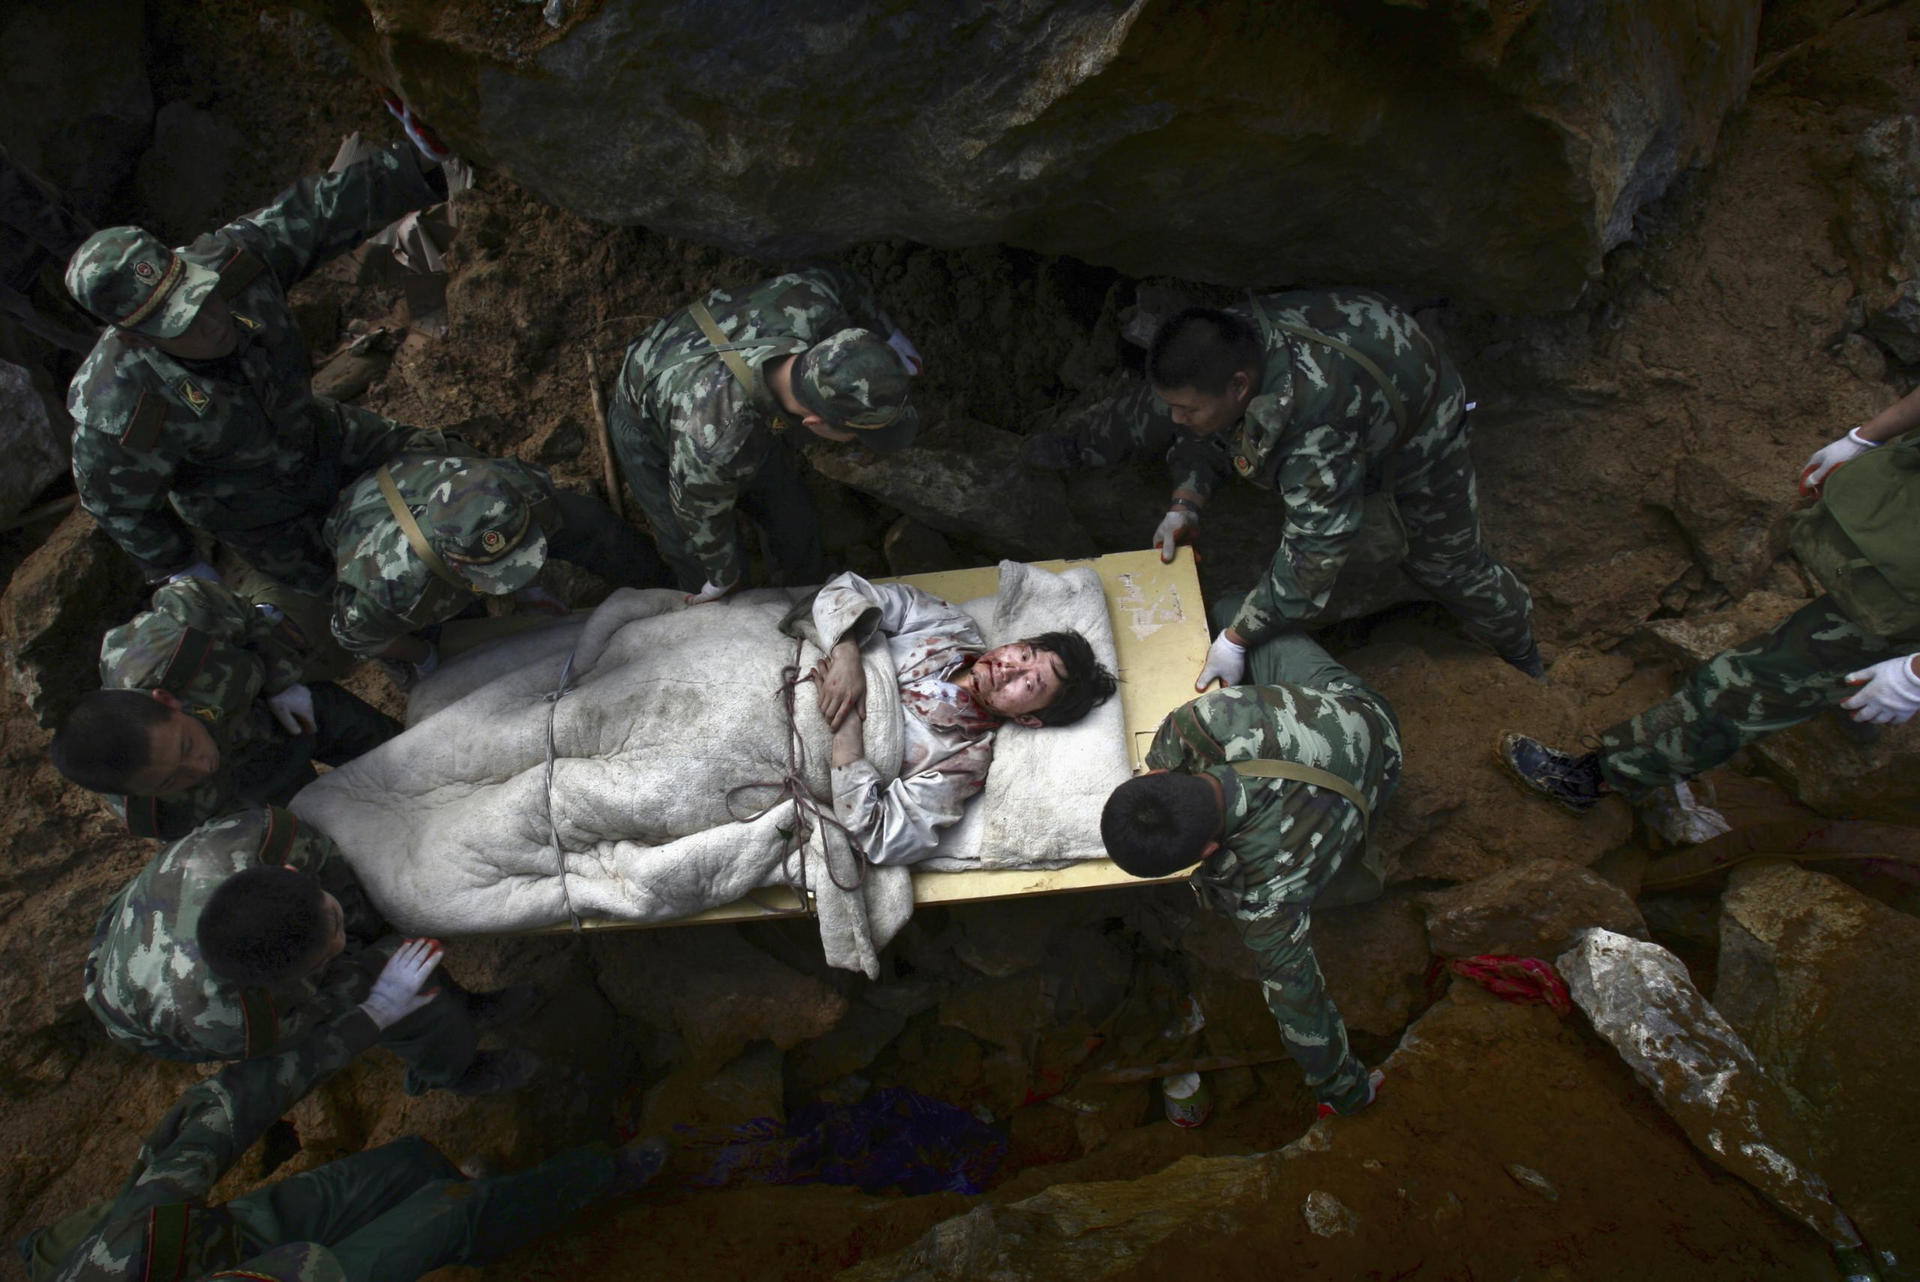 Chen's award-winning photograph "Rescue troops carry earthquake survivor, Beichuan county, China, 14 May".